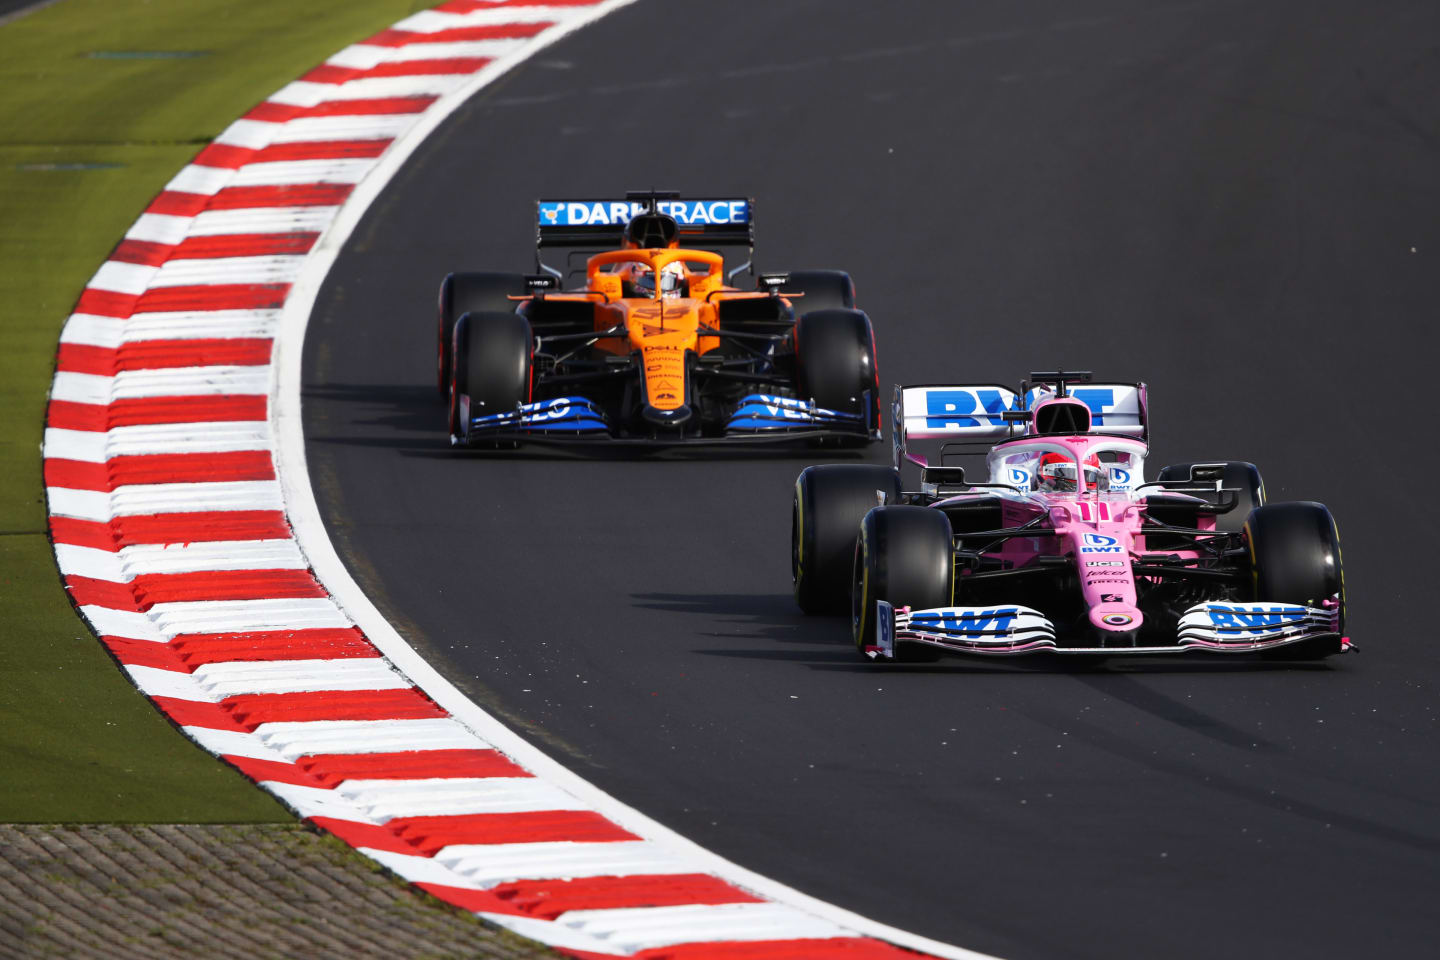 NUERBURG, GERMANY - OCTOBER 10: Sergio Perez of Mexico driving the (11) Racing Point RP20 Mercedes leads Carlos Sainz of Spain driving the (55) McLaren F1 Team MCL35 Renault during qualifying ahead of the F1 Eifel Grand Prix at Nuerburgring on October 10, 2020 in Nuerburg, Germany. (Photo by Bryn Lennon/Getty Images)